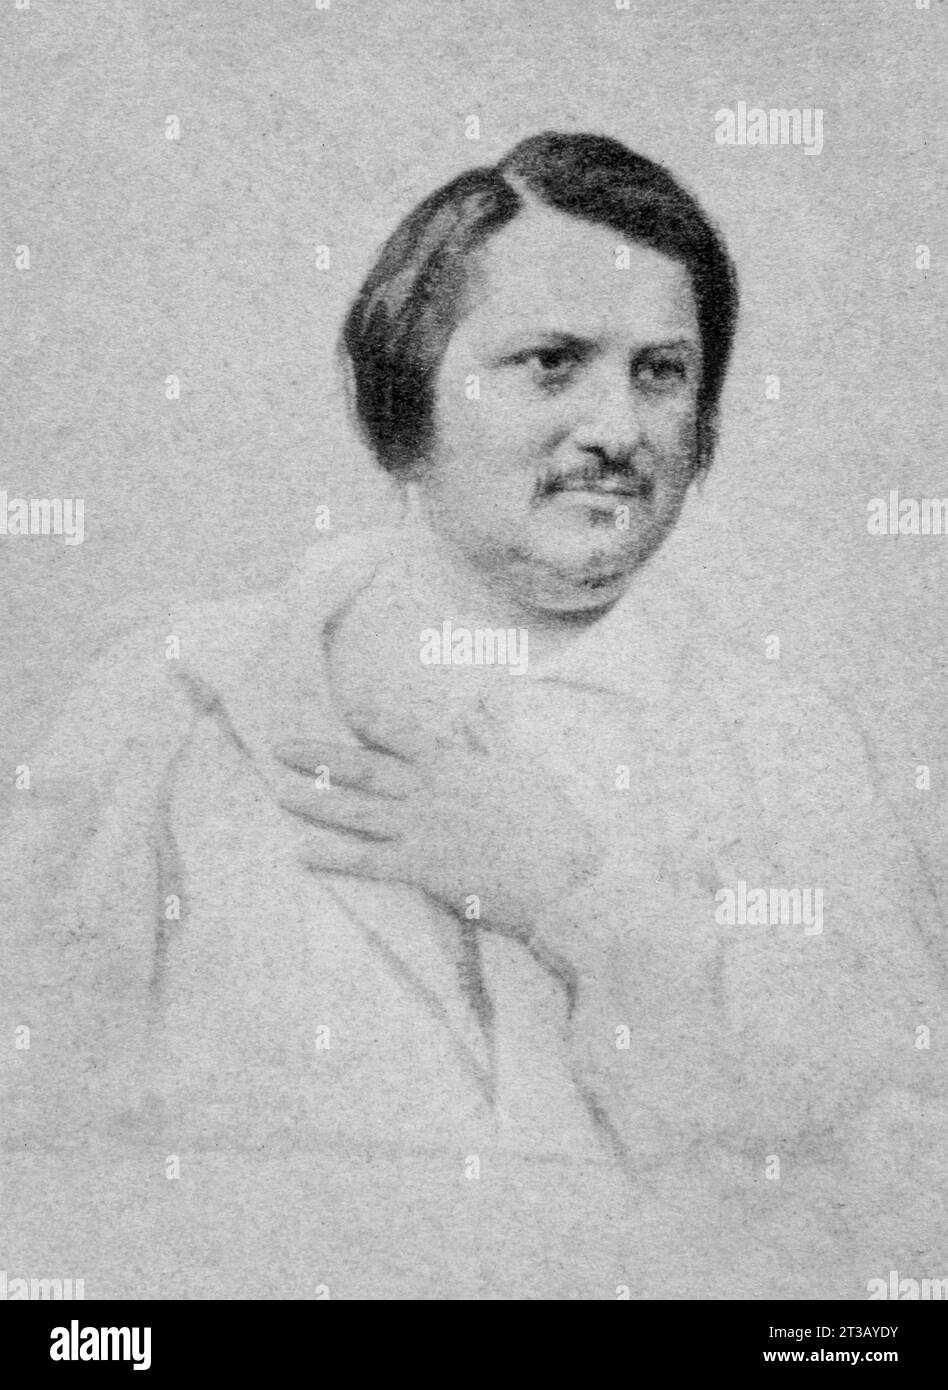 Portrait of Honoré de Balzac, known as of Honore Balzac (1799 - 1850) a French writer. Novelist, playwright, literary critic, art critic, essayist, journalist and printer, he left one of the most imposing romantic works in French literature, with more than ninety novels and short stories published from 1829 to 1855 , brought together under the title of The Human Comedy. Stock Photo